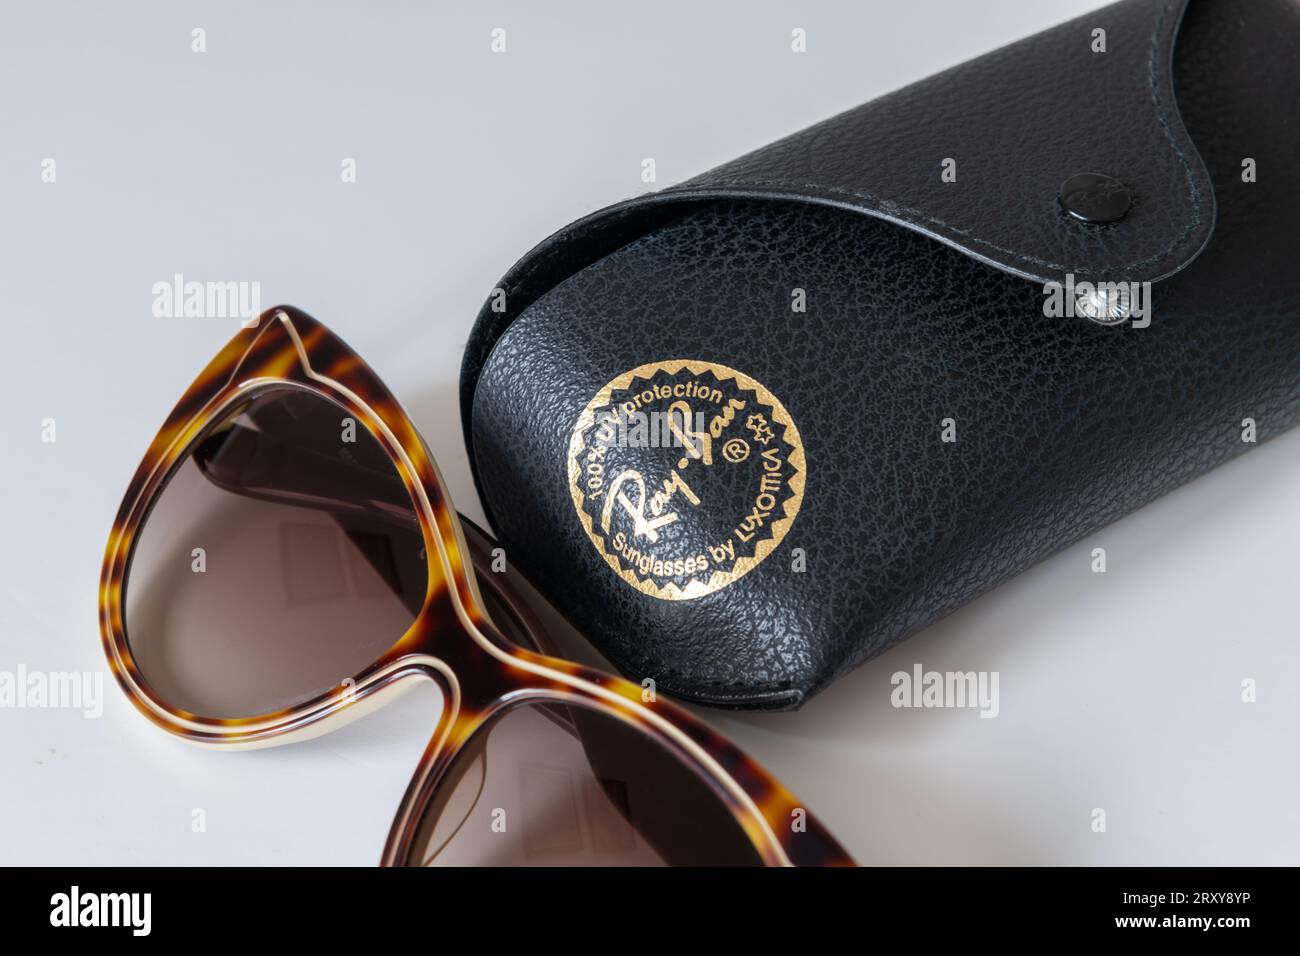 Buy Rayban Case Online In India - Etsy India